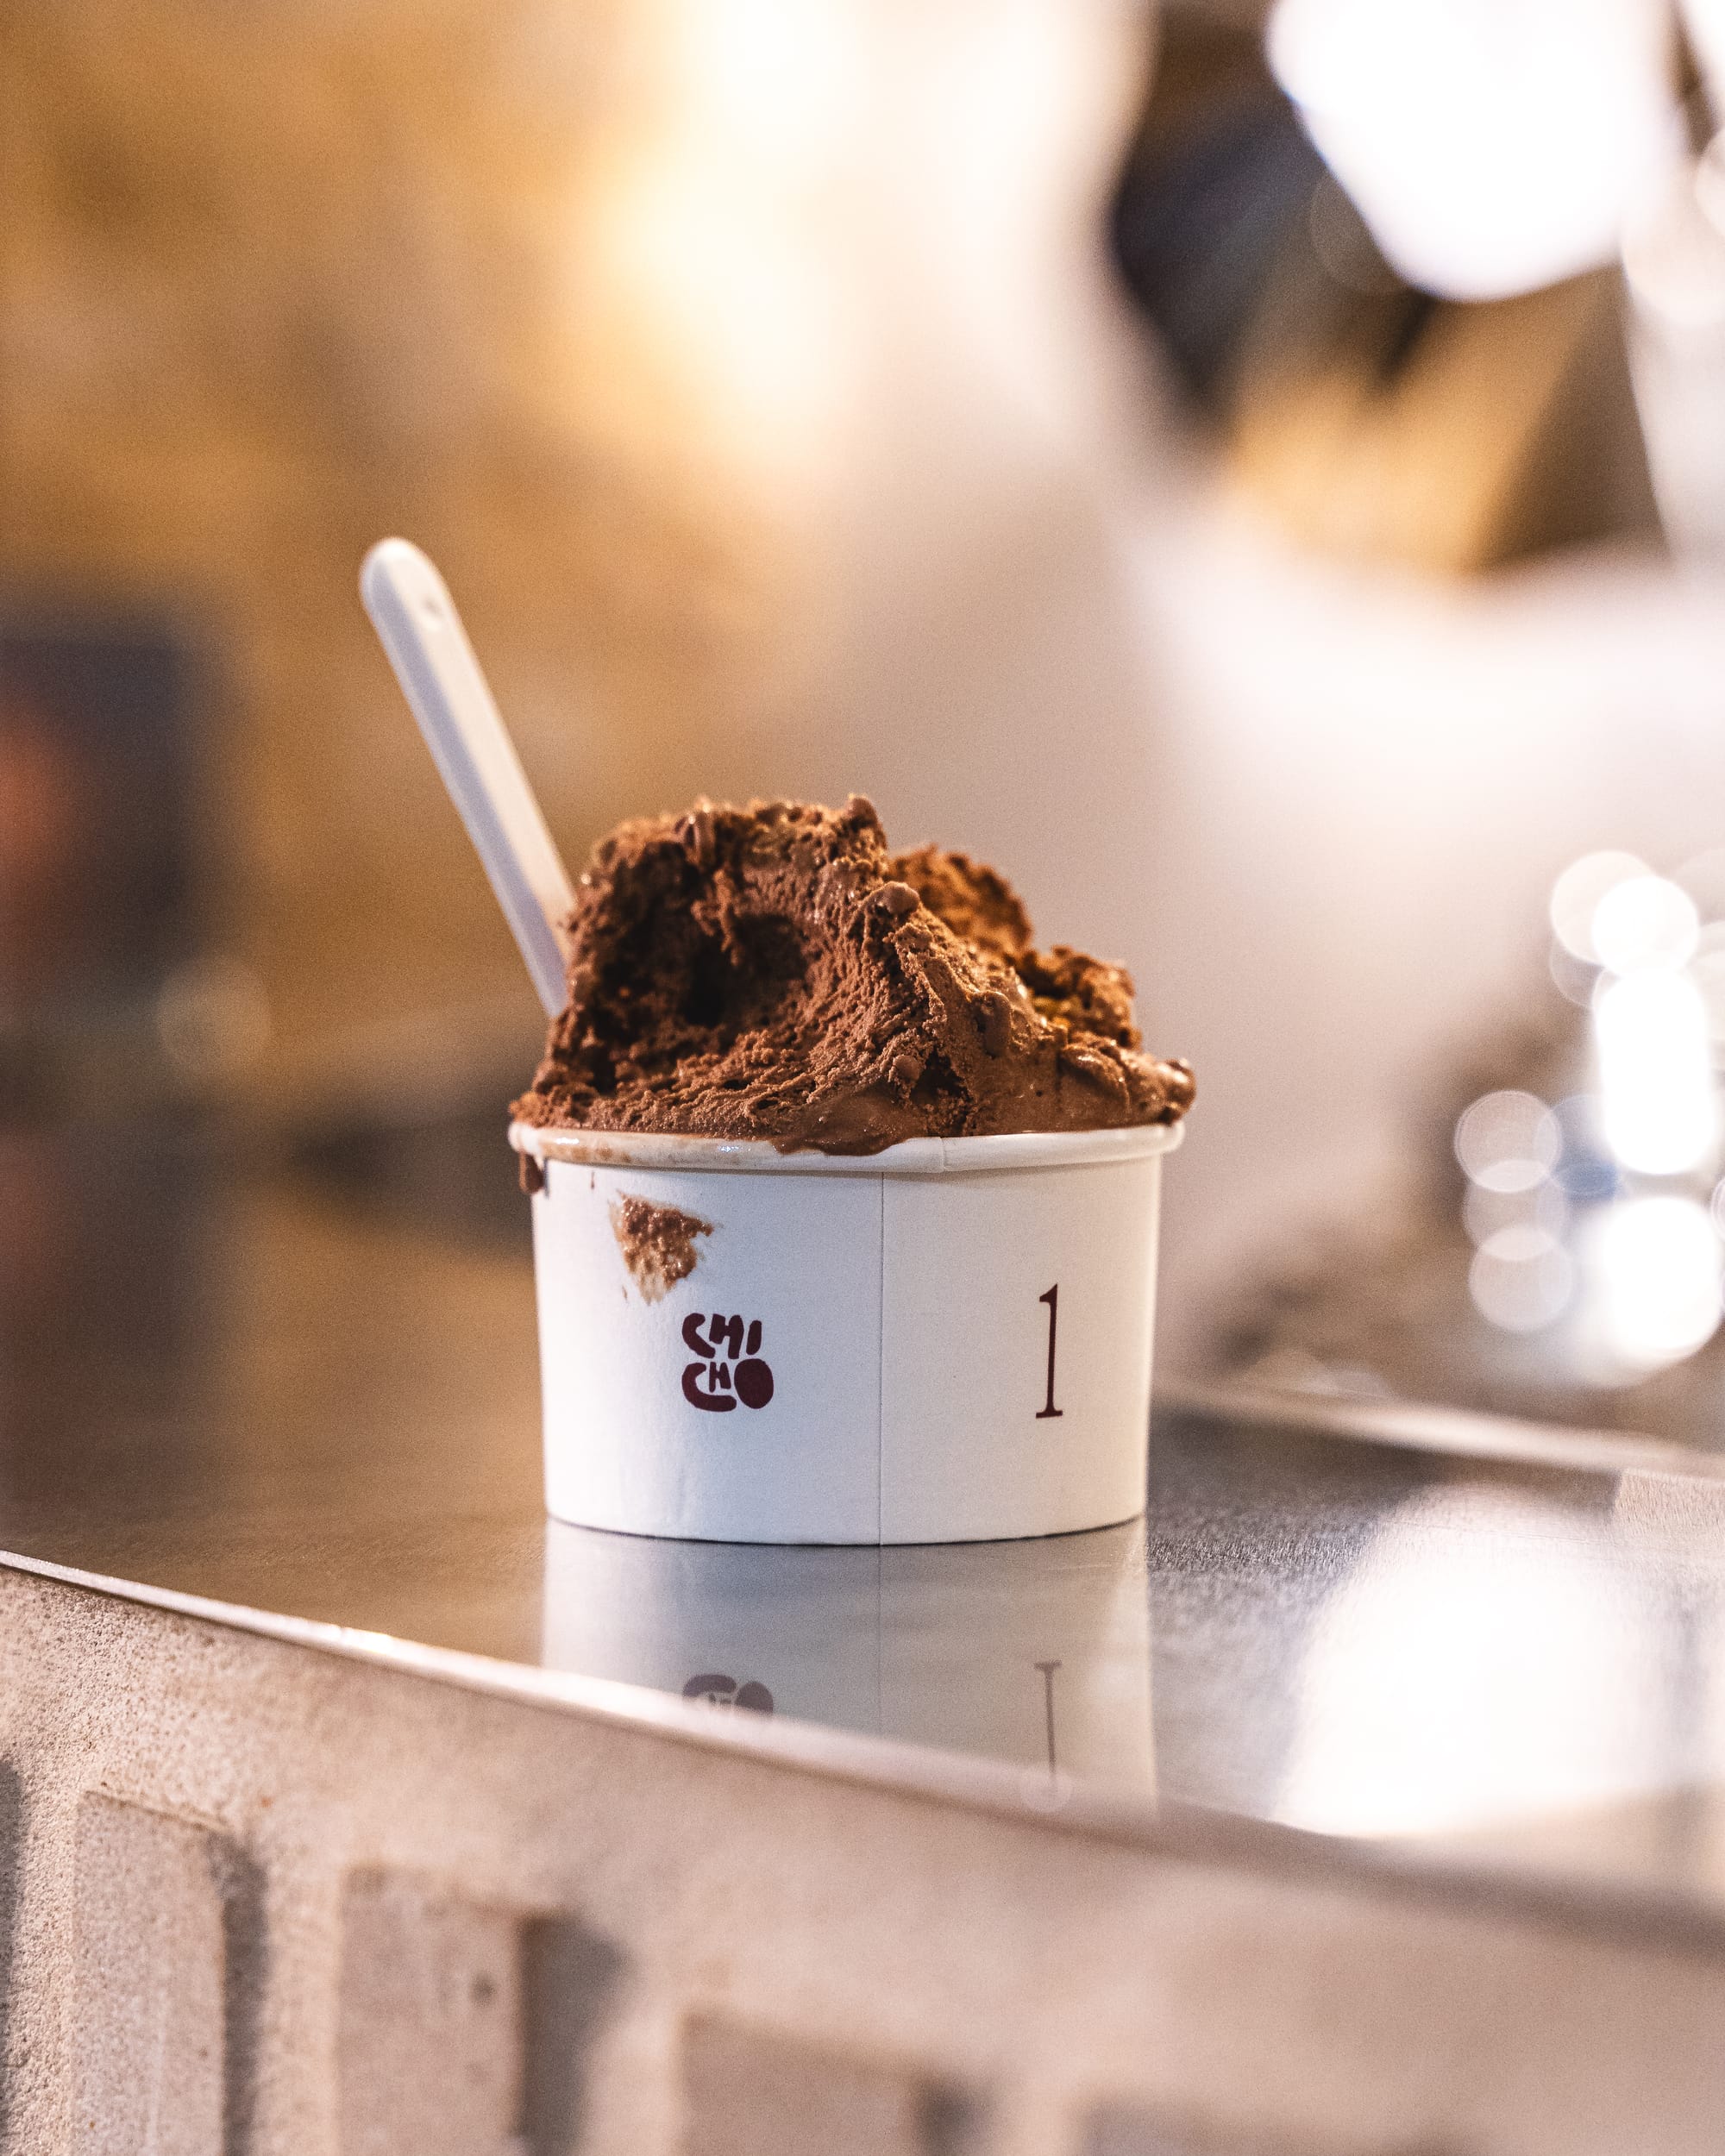 Close up of chocolate gelato in a paper cup